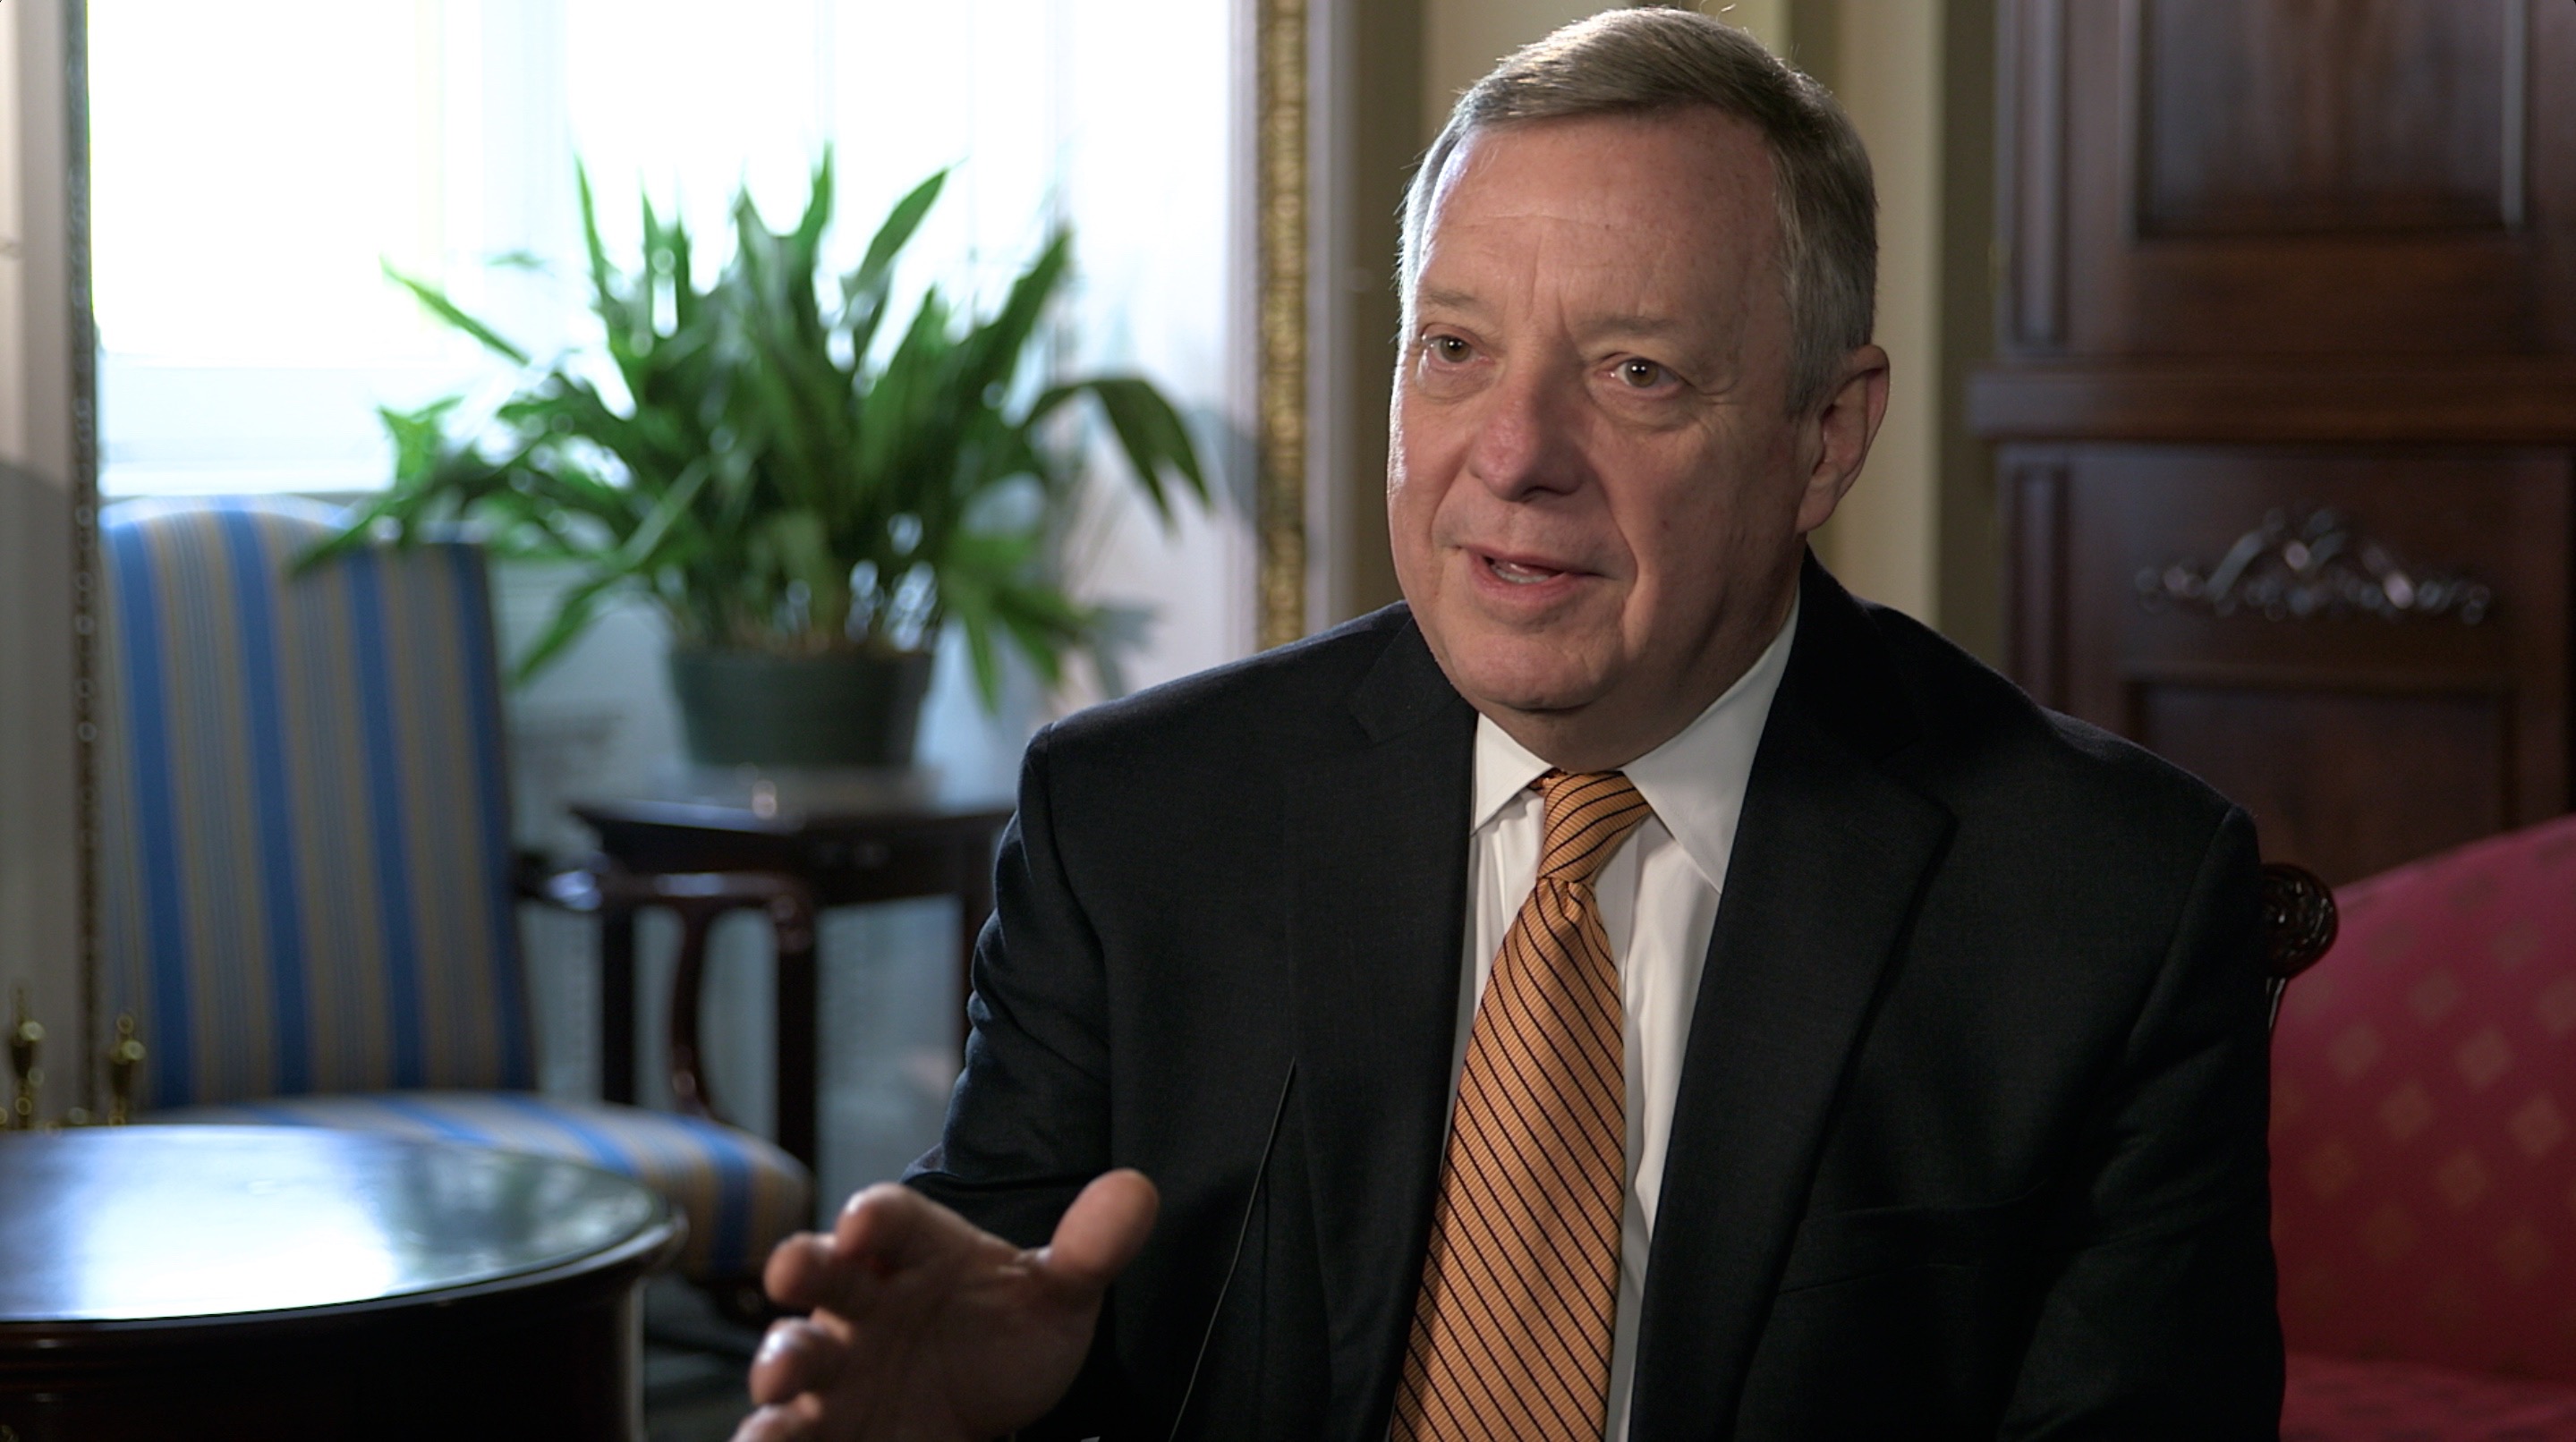 Durbin, Duckworth Announce Application Process For U.S. Attorney in Northern District of Illinois